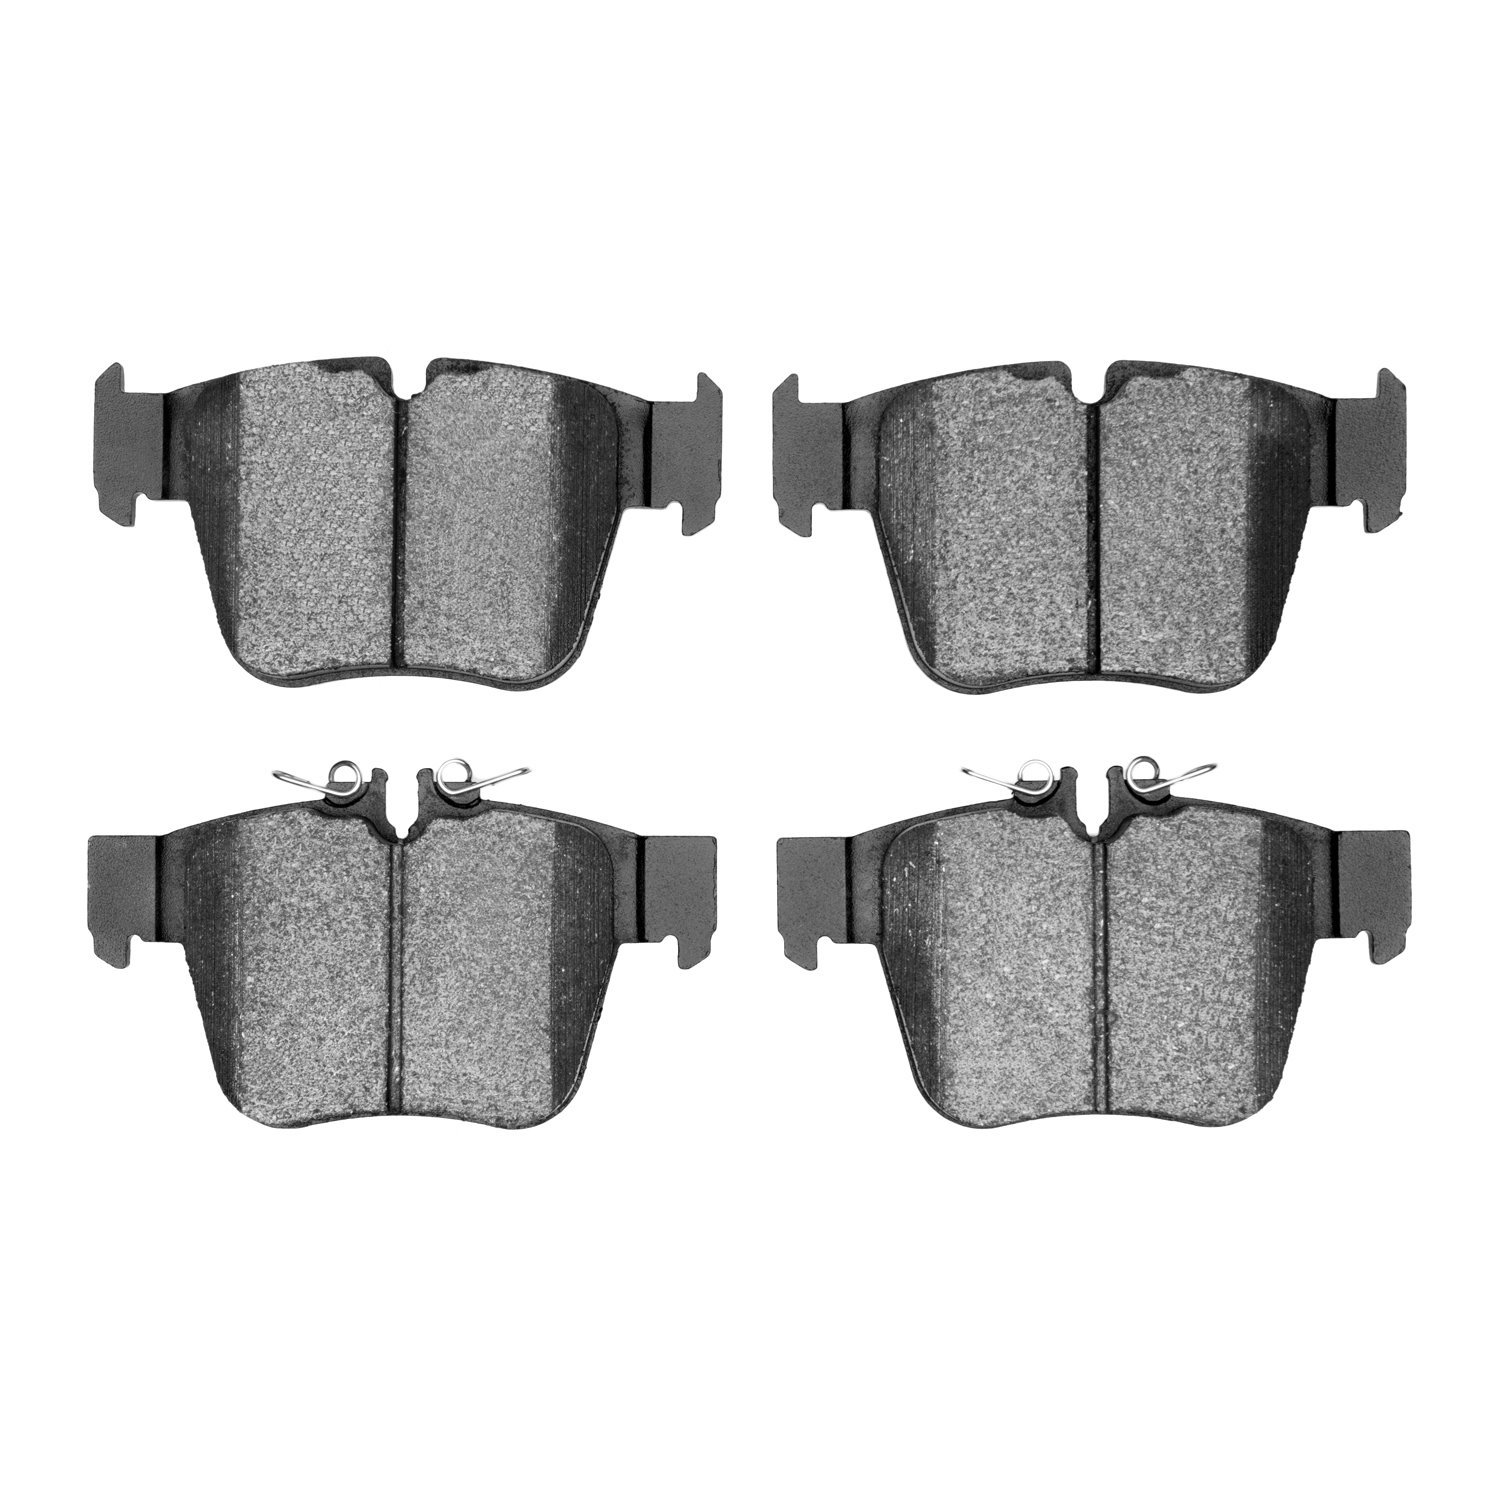 Euro Ceramic Brake Pads, Fits Select Mercedes-Benz, Position: Front & Rear